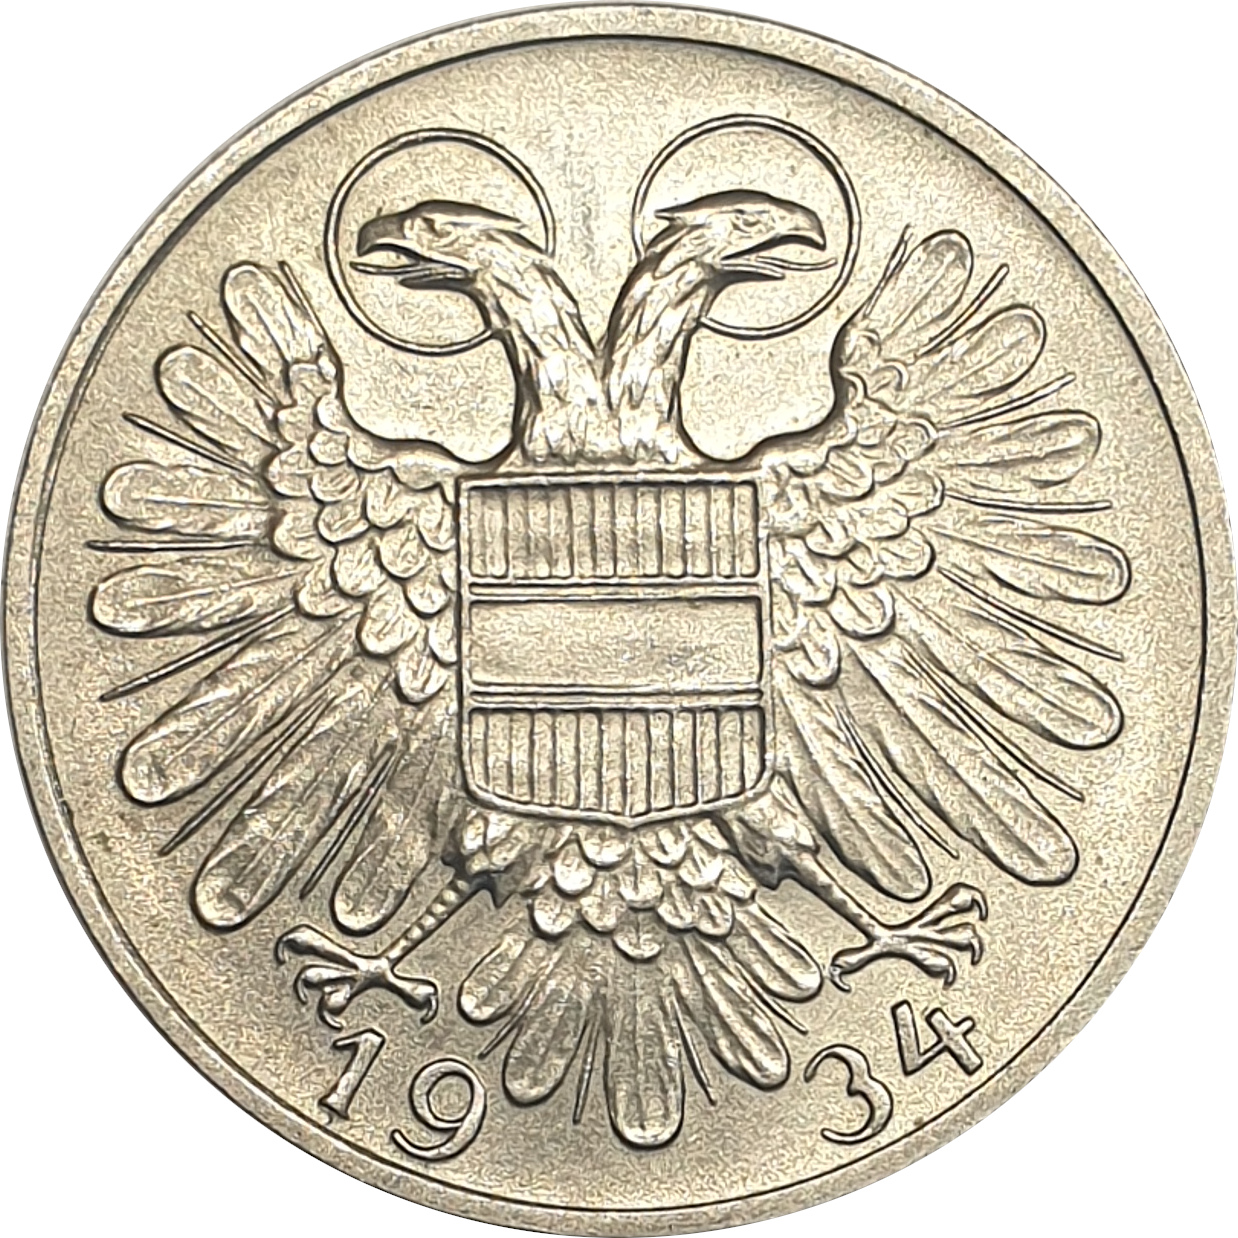 50 groschen - Large double Headed Eagle